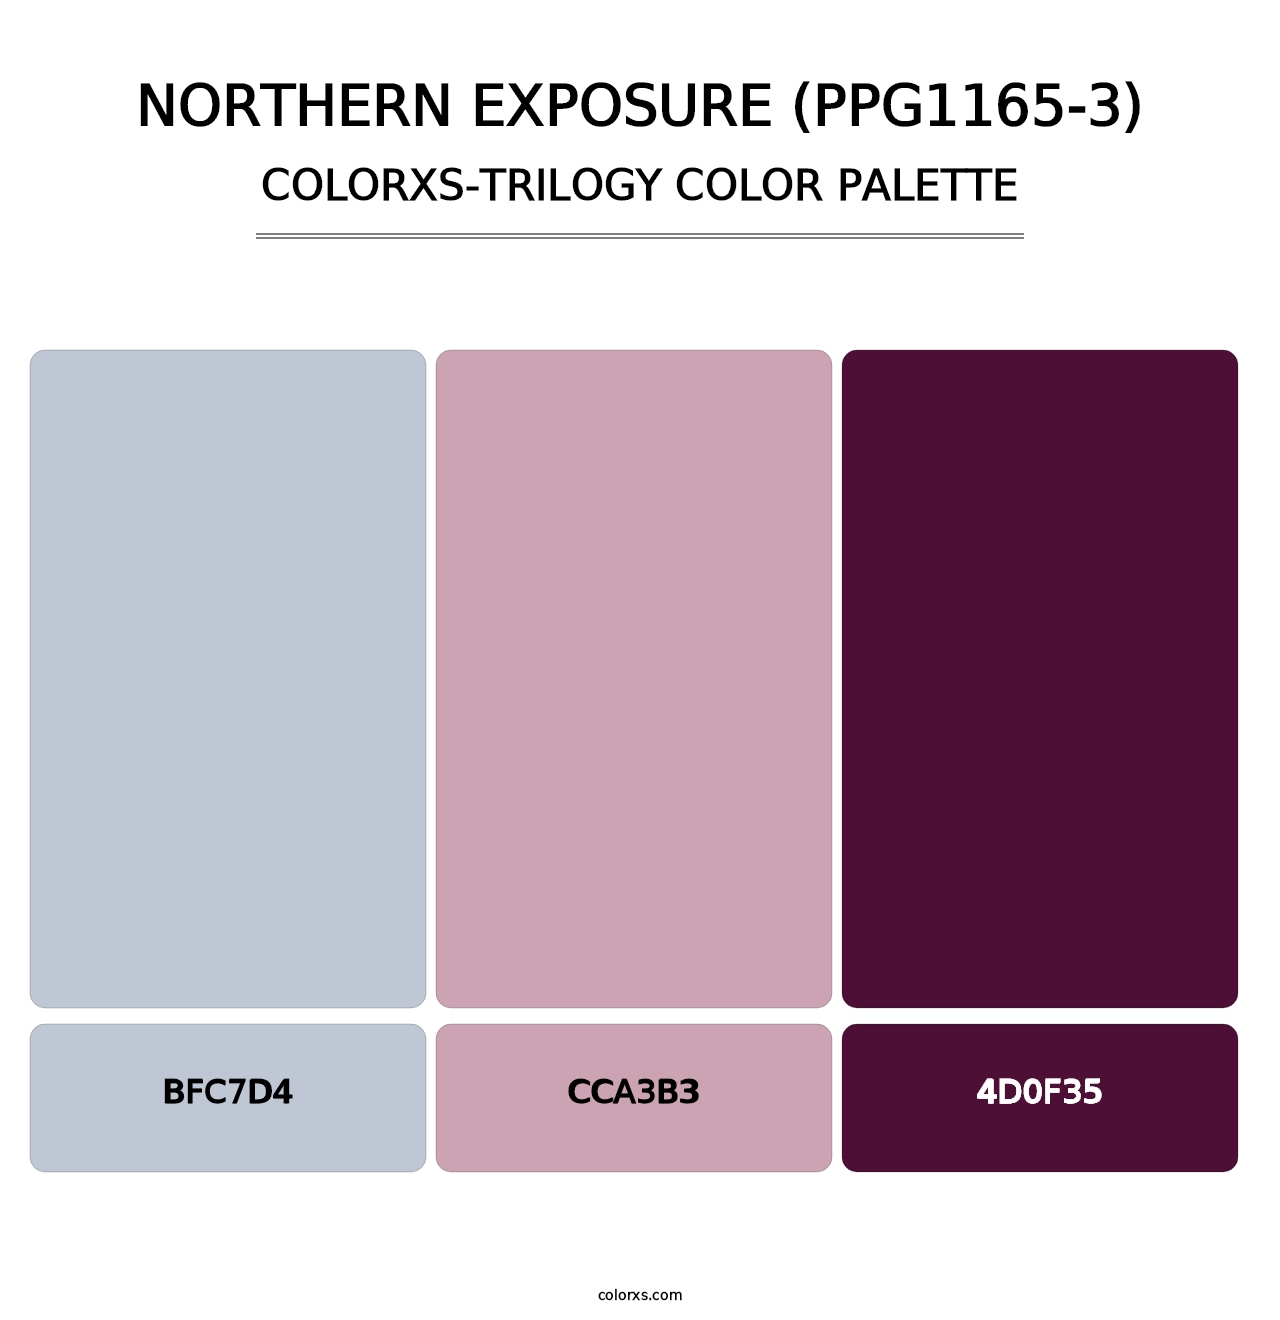 Northern Exposure (PPG1165-3) - Colorxs Trilogy Palette